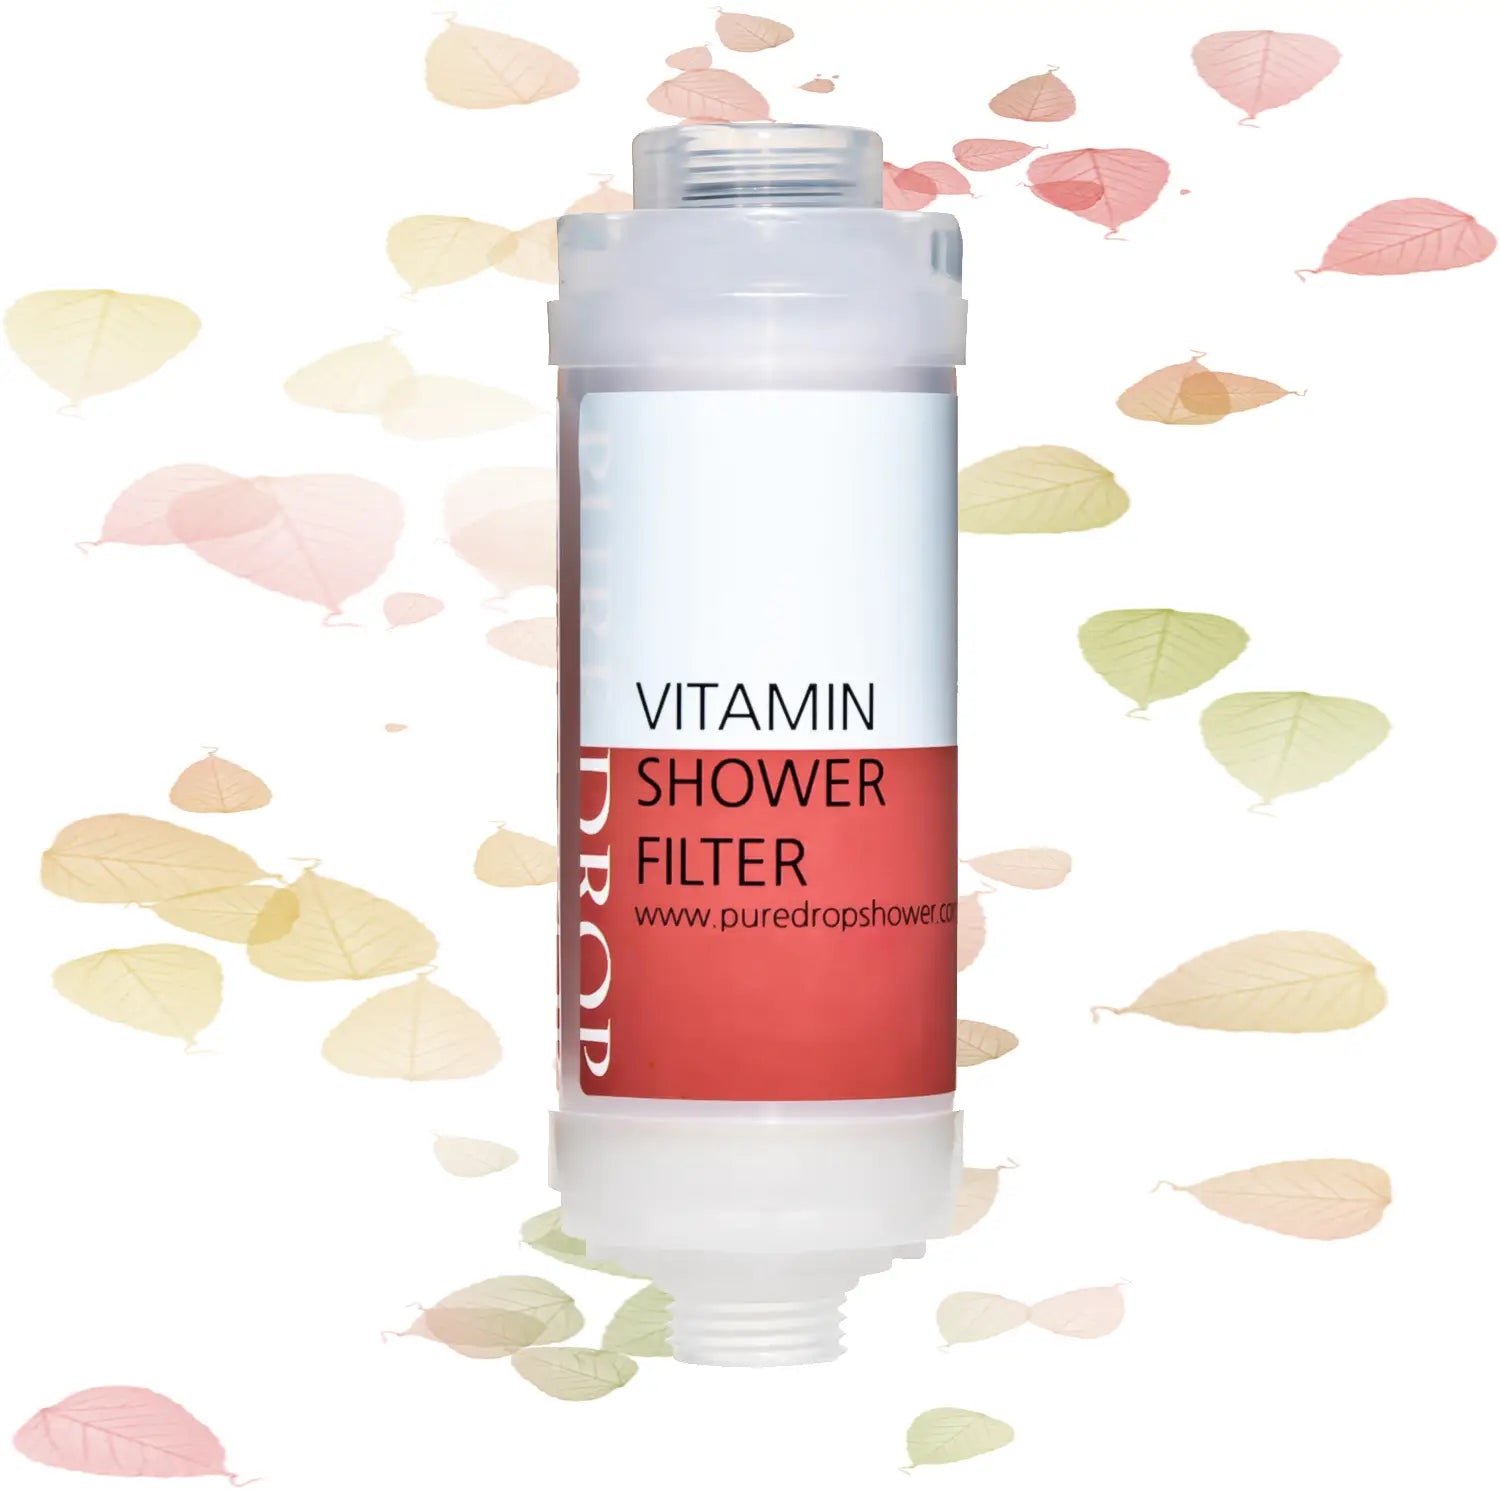 Vitamin Shower Filter Nourish in Rose Scent by Pure Drop. Shower filter with Vitamin C. Shower filter for anti aging. Shower filter for better skin. Shower filter for harmful chemicals. Rose aromatherapy shower filter.